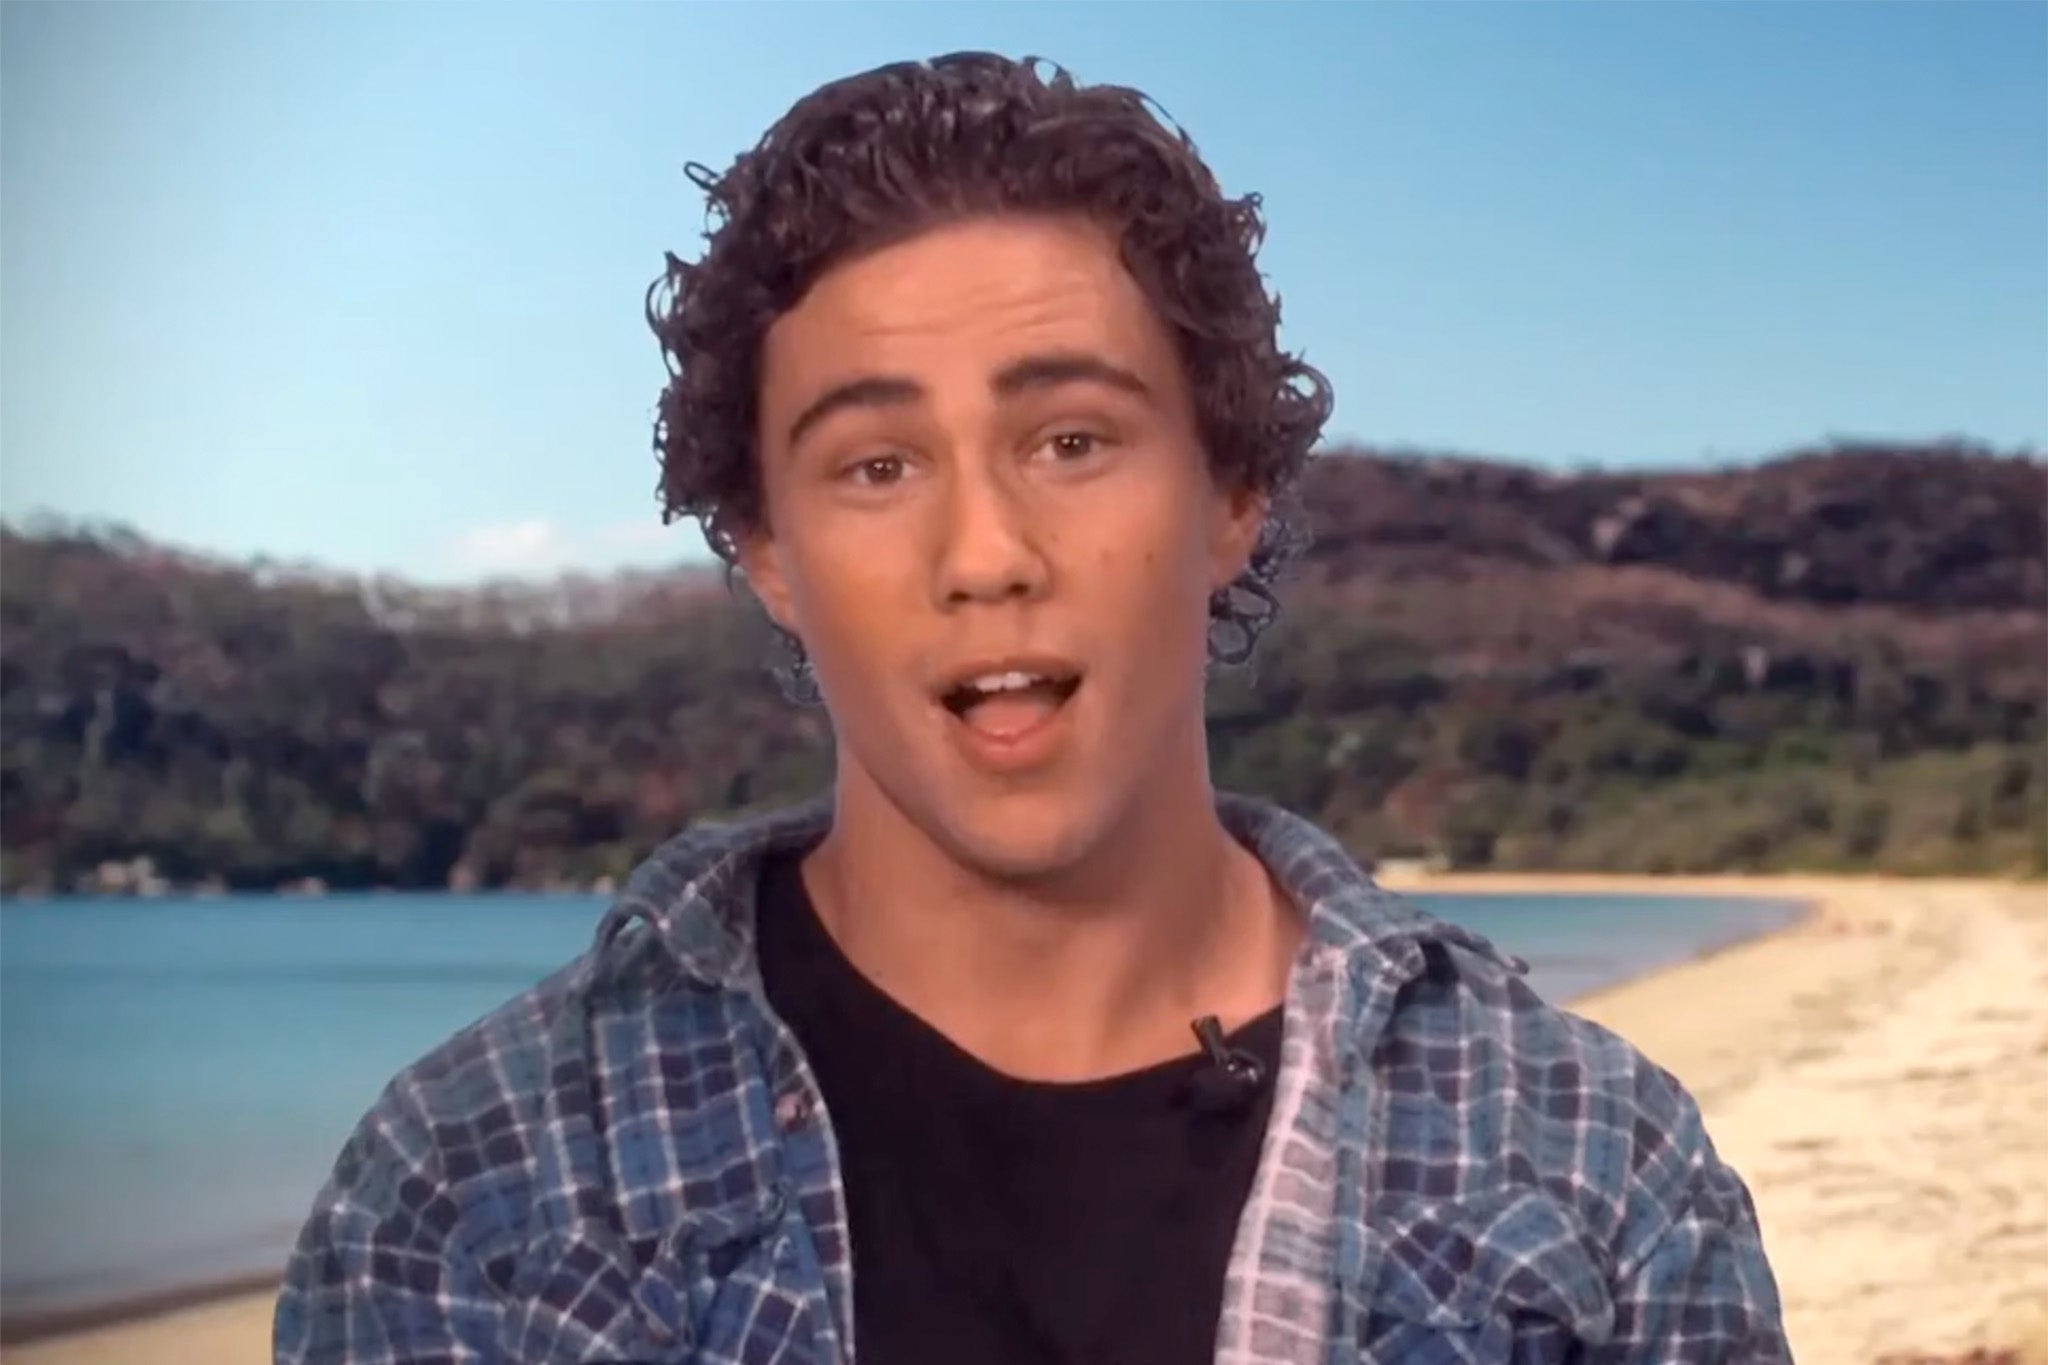 Pledger appeared for more than 300 episodes of Home and Away